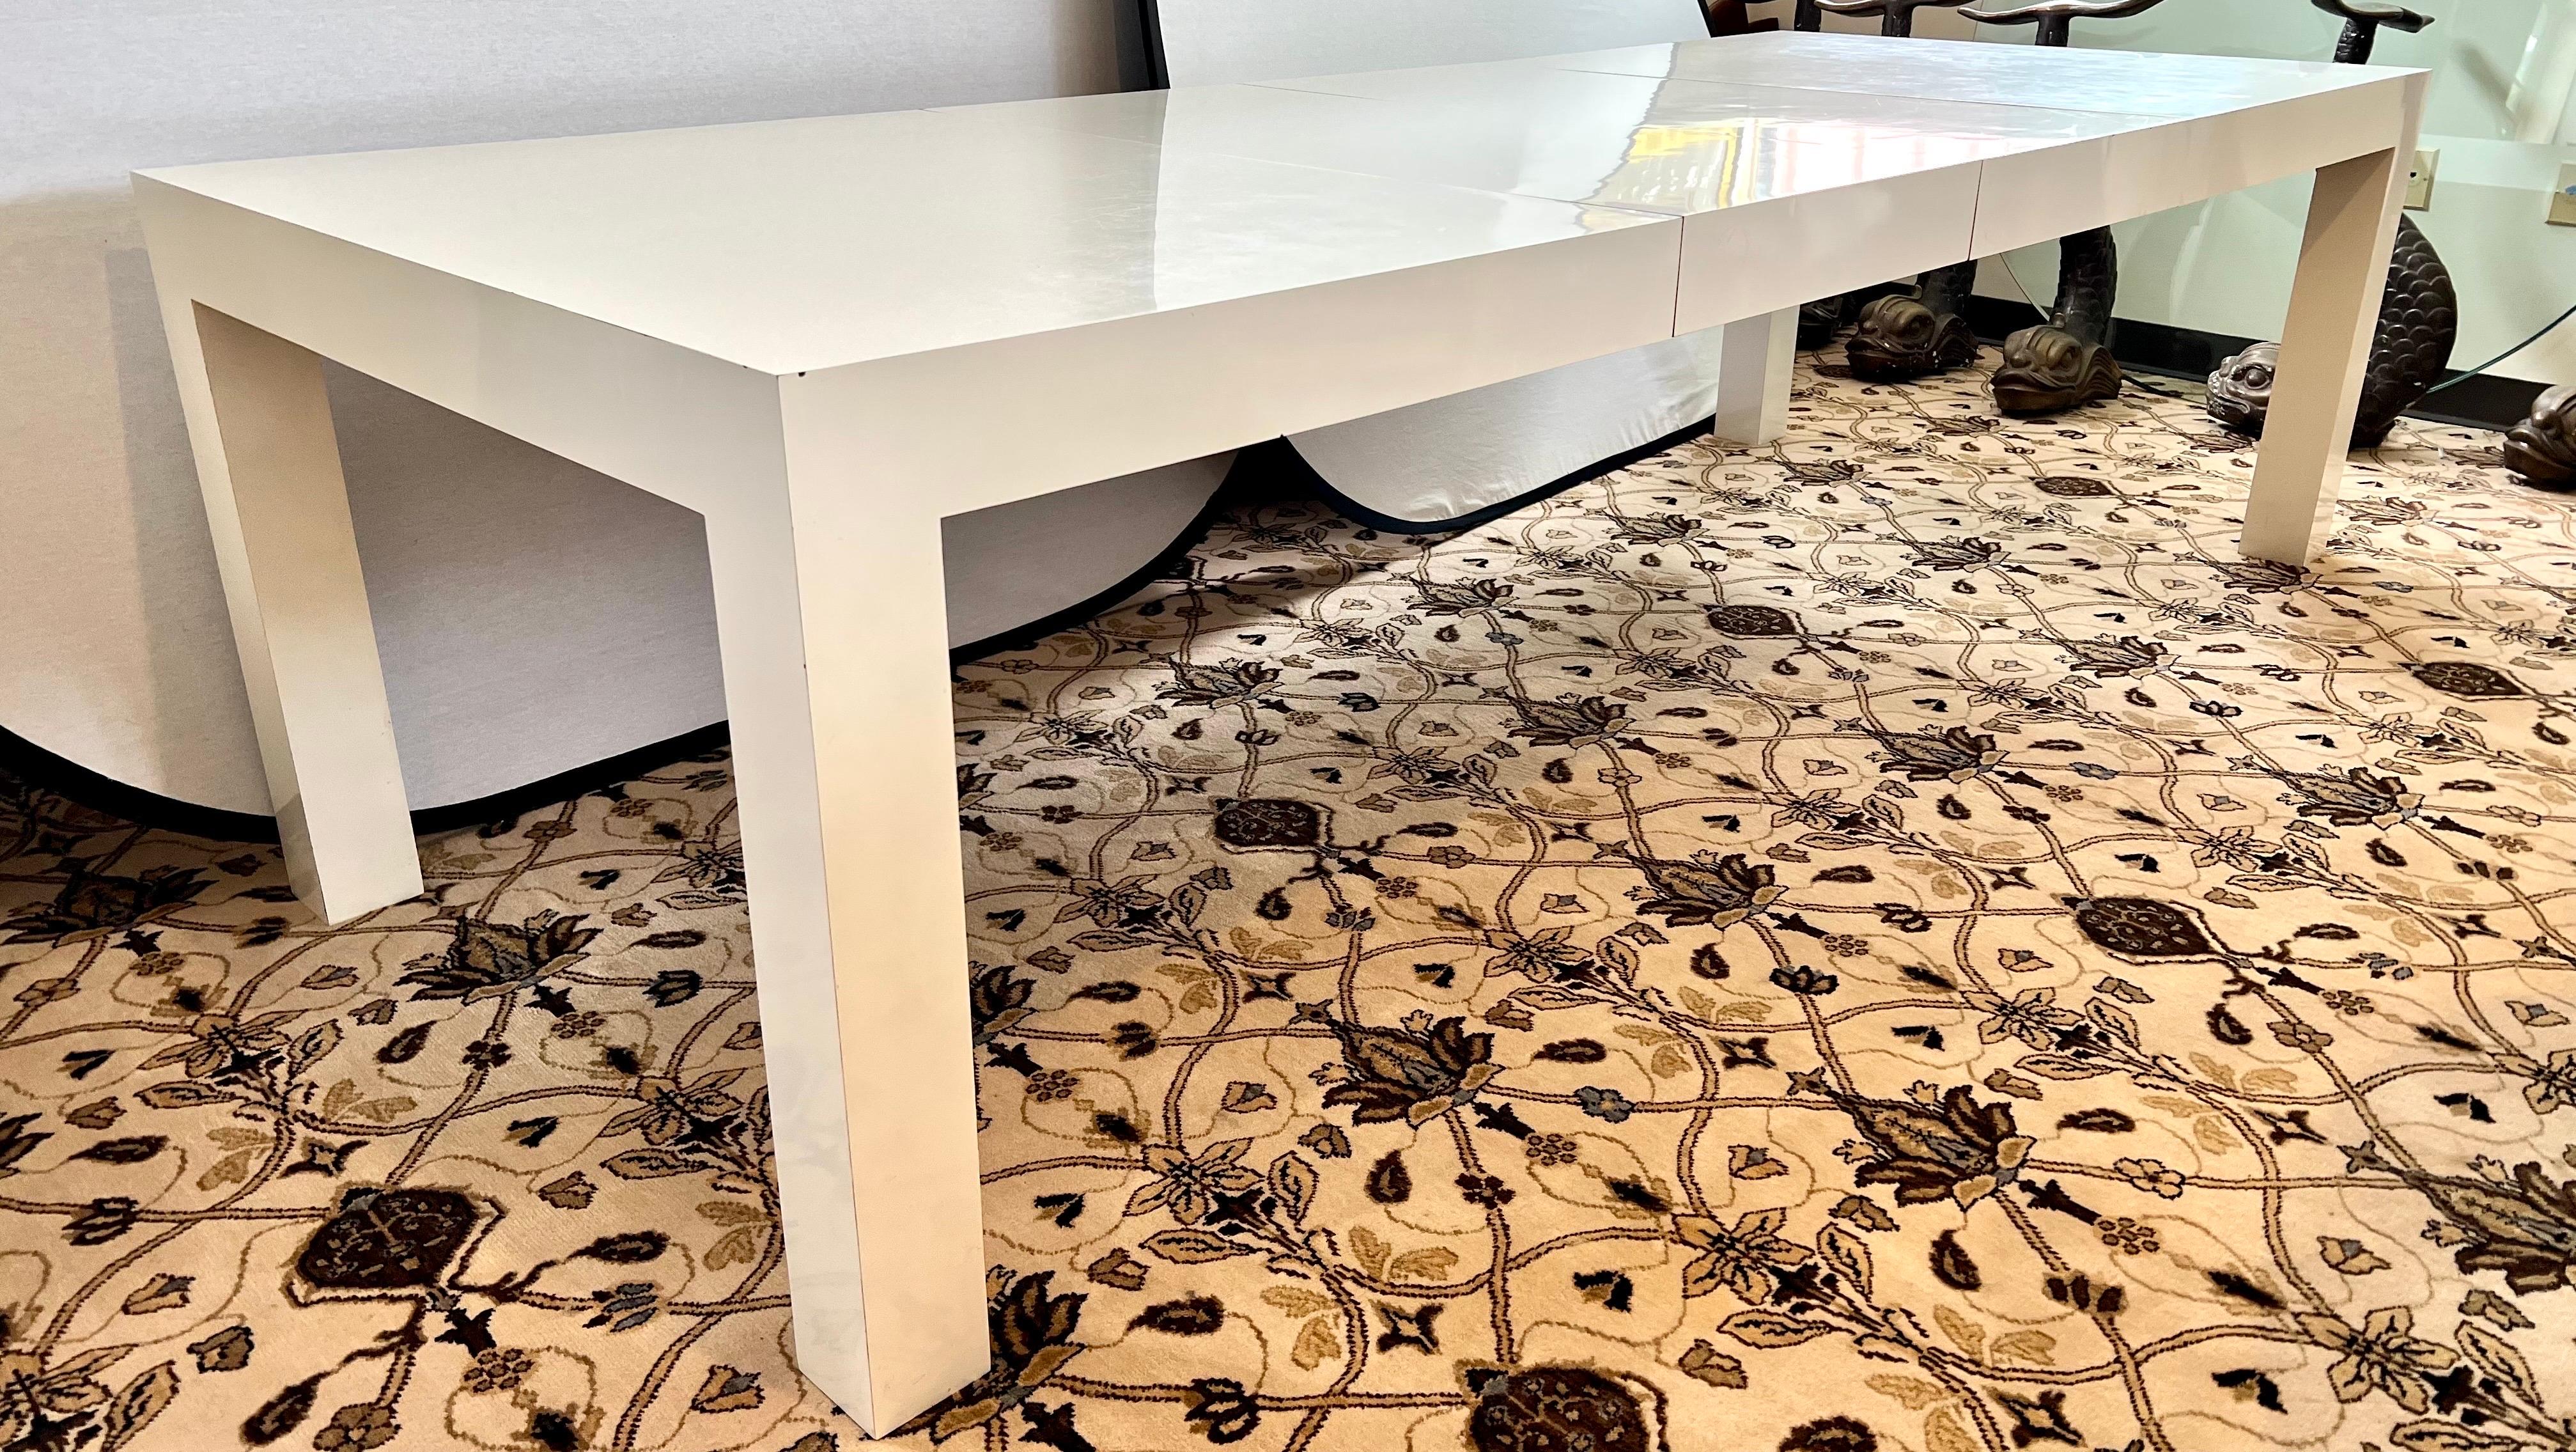 Sleek modern and clean lines characterize this Post-Modern parsons dining table with a glossy white lacquered surface. Extra long size when leaves are inserted. Each leaf is 20